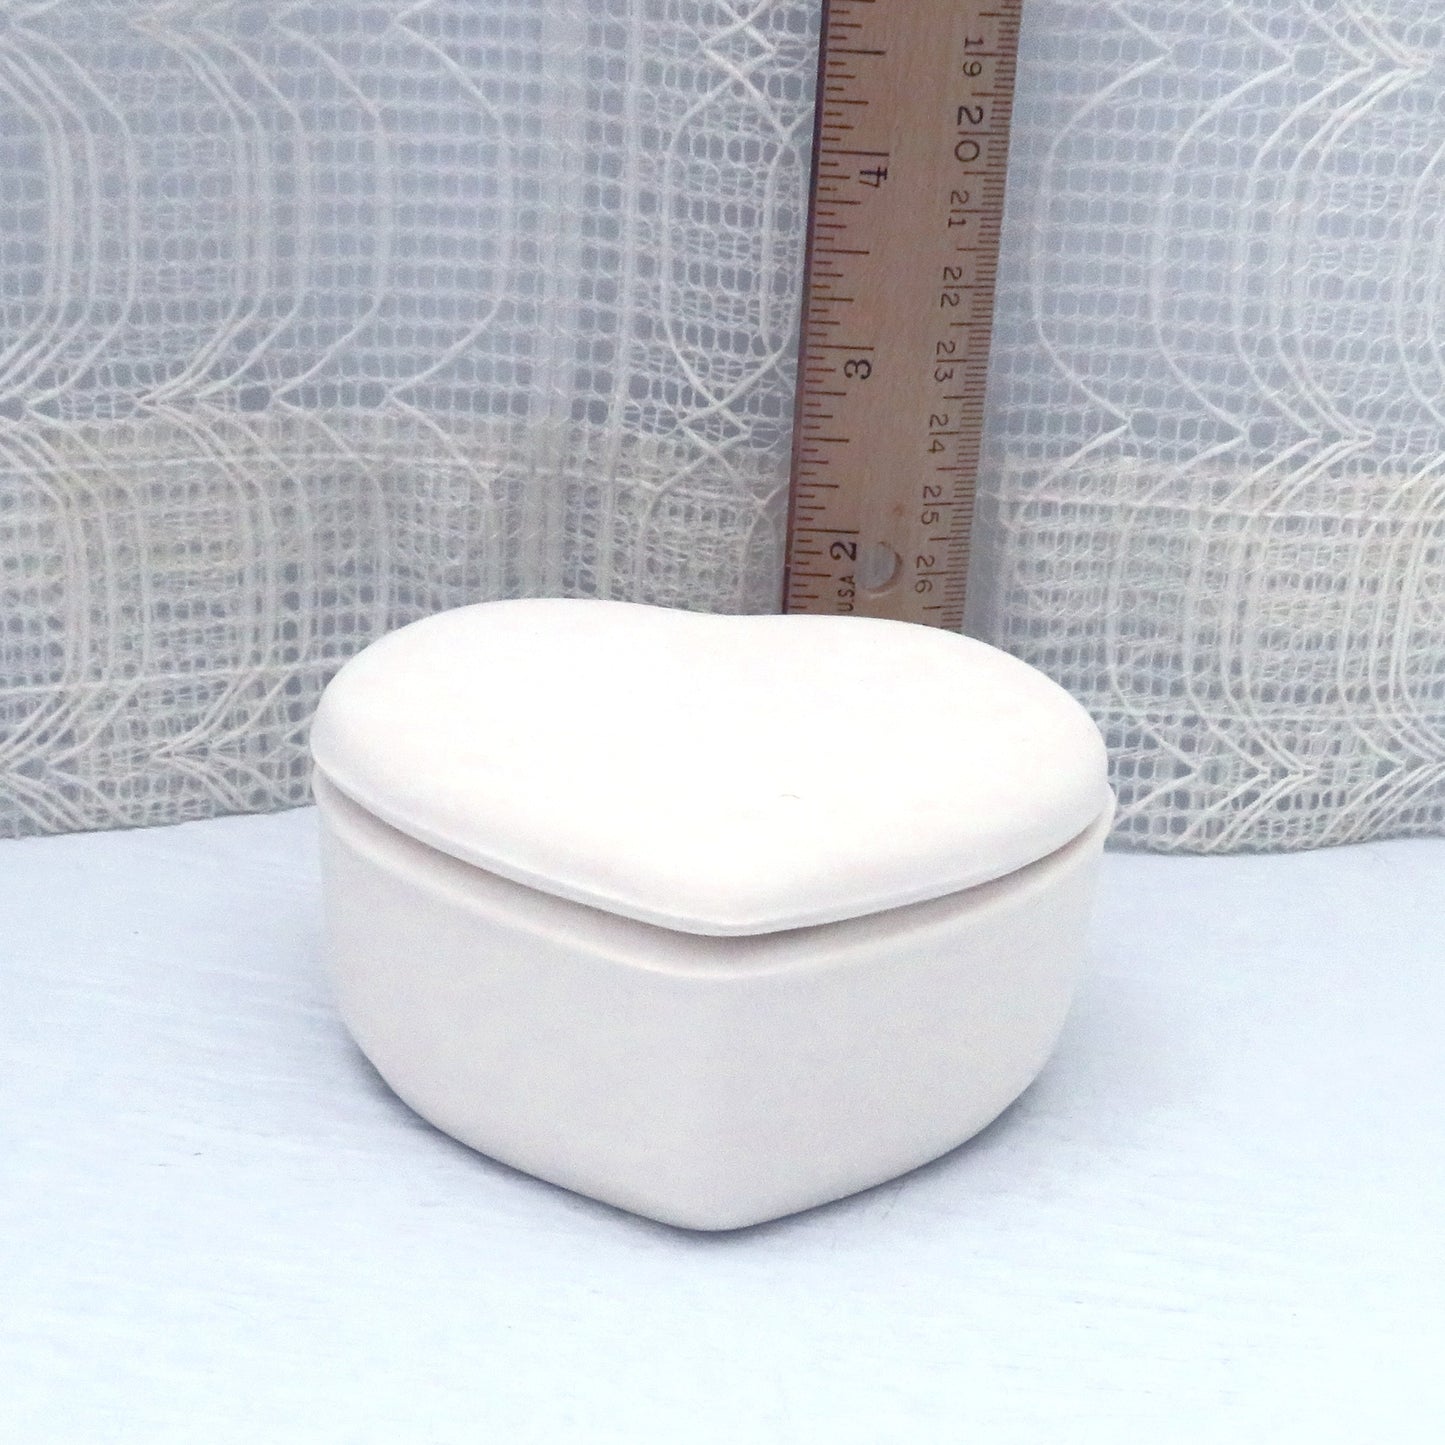 Handmade Ready to Paint Ceramic Heart Trinket Dish with Lid / Ceramic Jewelry Dish to Paint / Do It Yourself Ceramic Lidded Heart Box